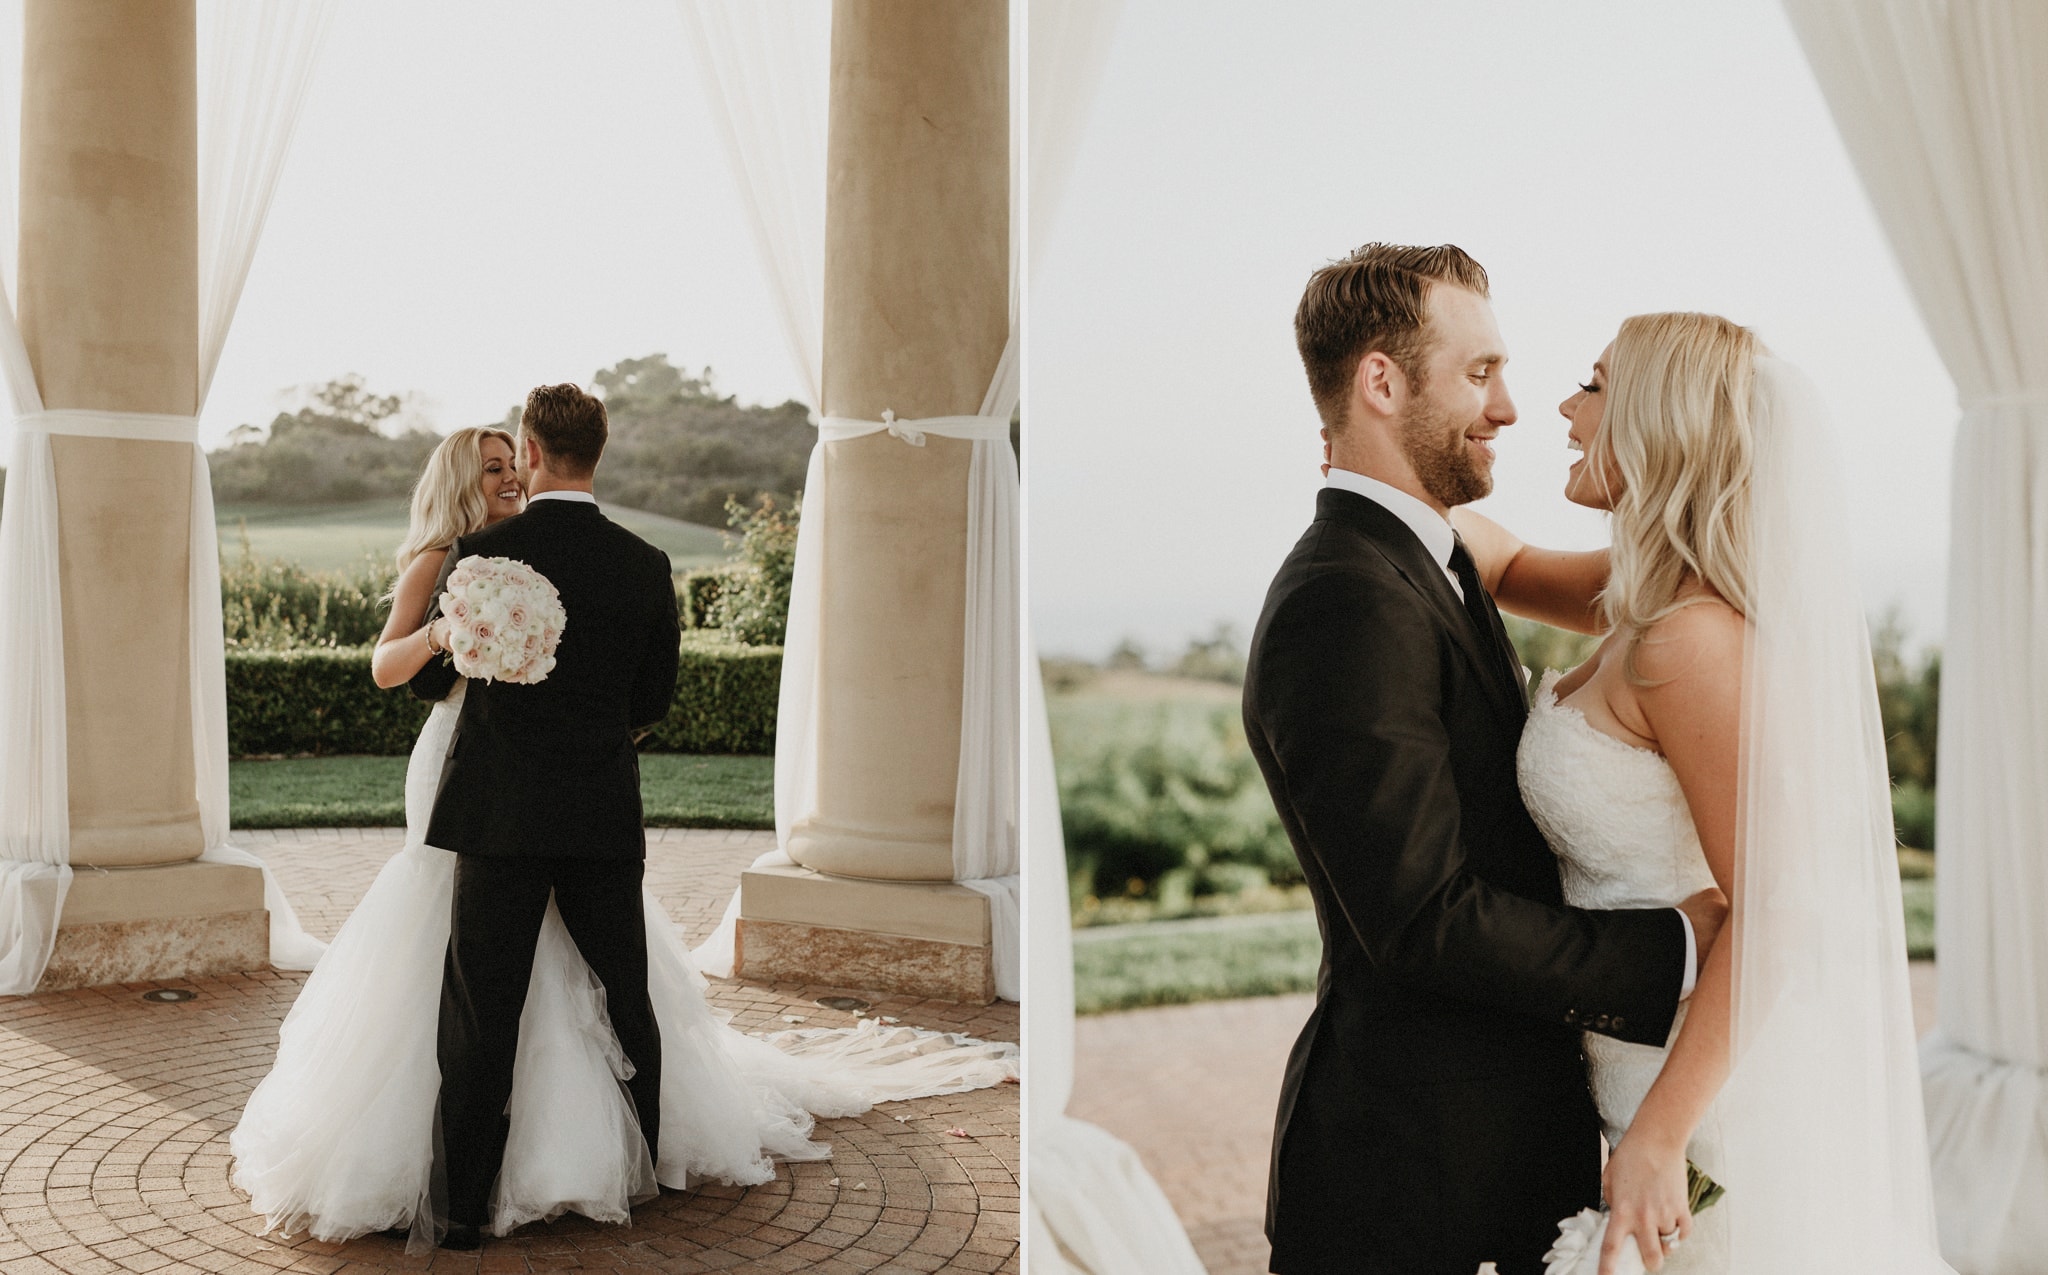 A bride and groom dance under a beautiful veranda during their wedding at Pelican Hill Resort, Orange County.